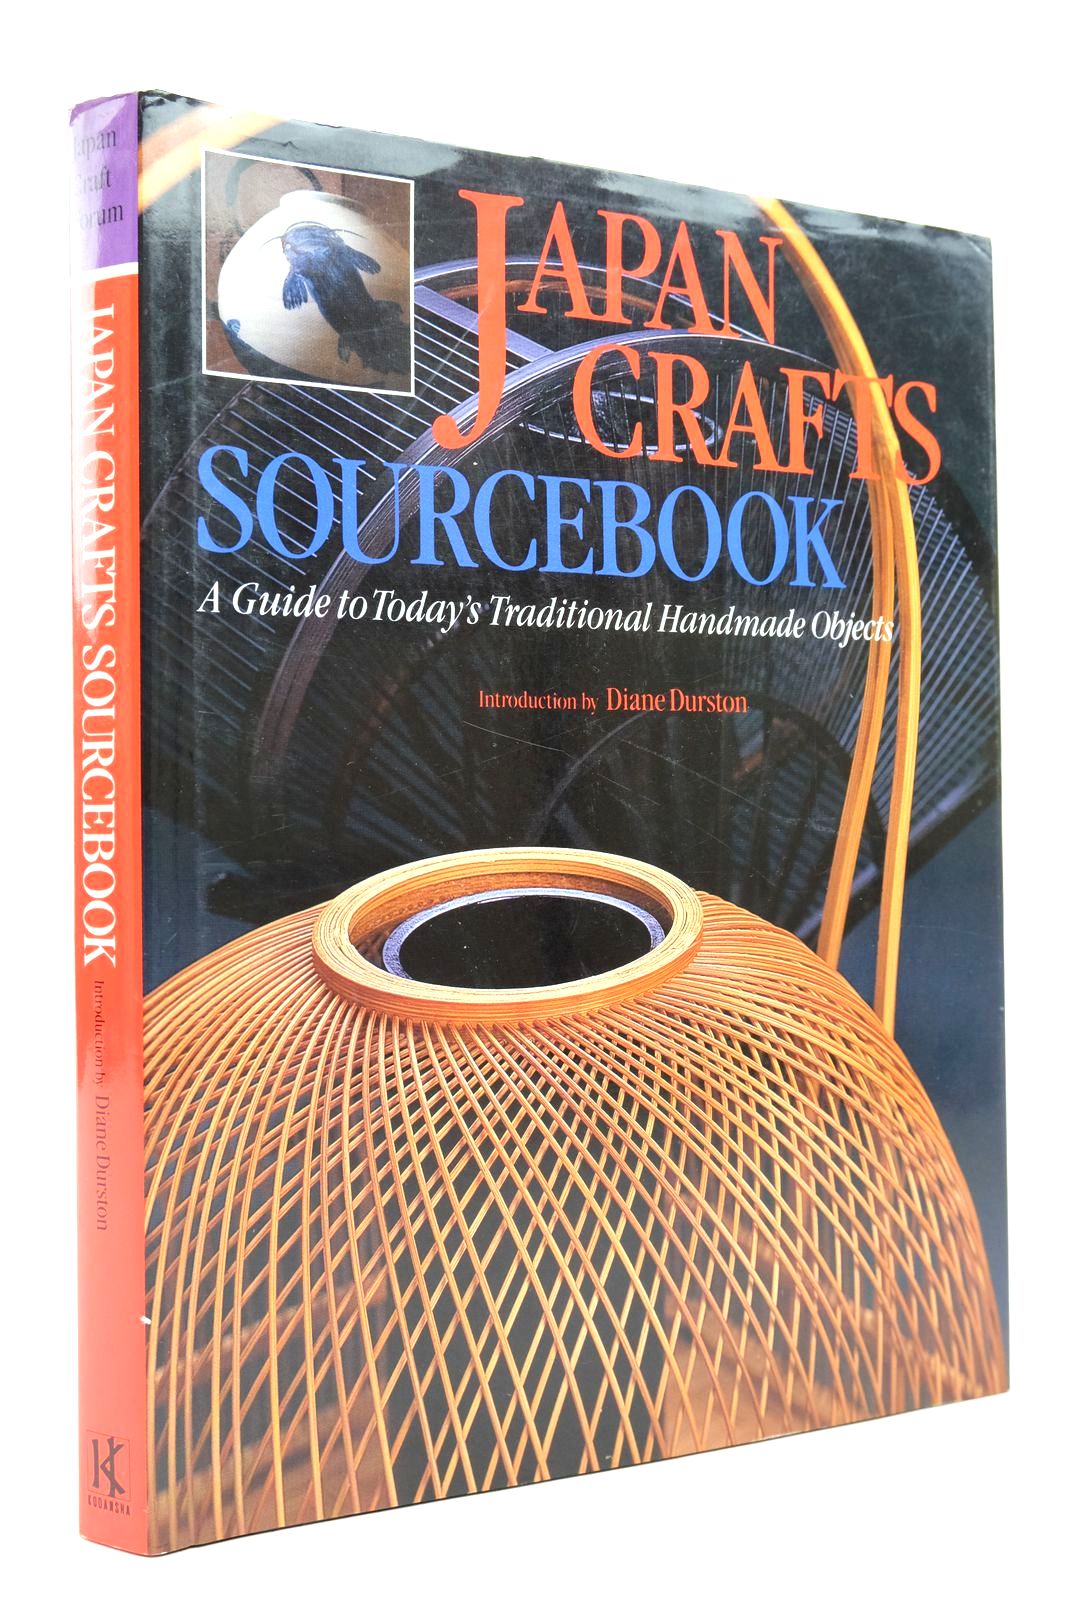 Photo of JAPAN CRAFTS SOURCEBOOK: A GUIDE TO TODAY'S TRADITIONAL HANDMADE OBJECTS- Stock Number: 2140813